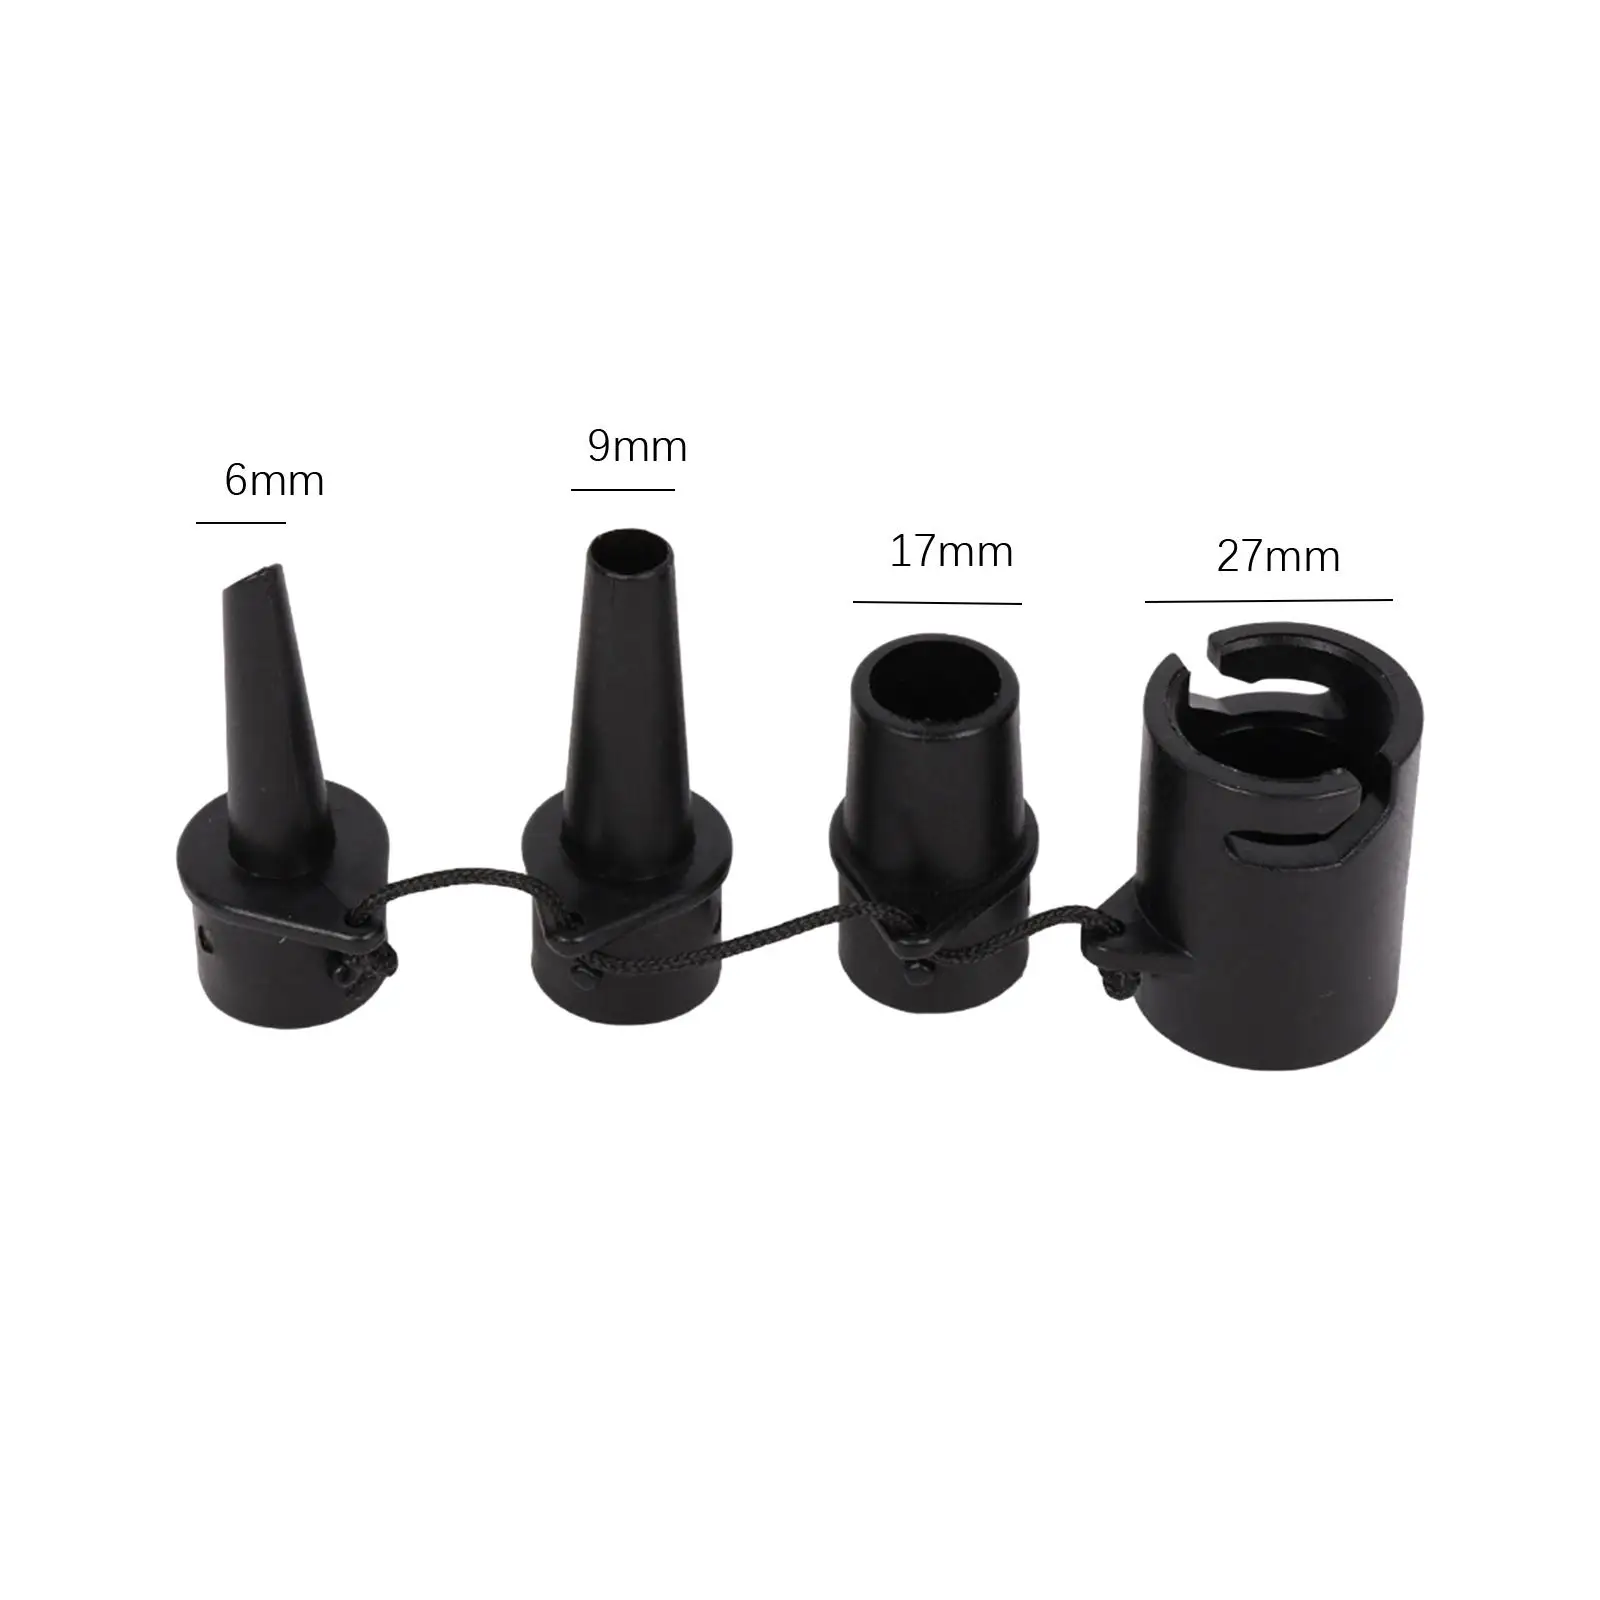 Valve Adapter Portable Kayak Inflatable Pump Adapter Air Valve Attachment for Dinghy Inflatable Kayak Rubber Boats Boat